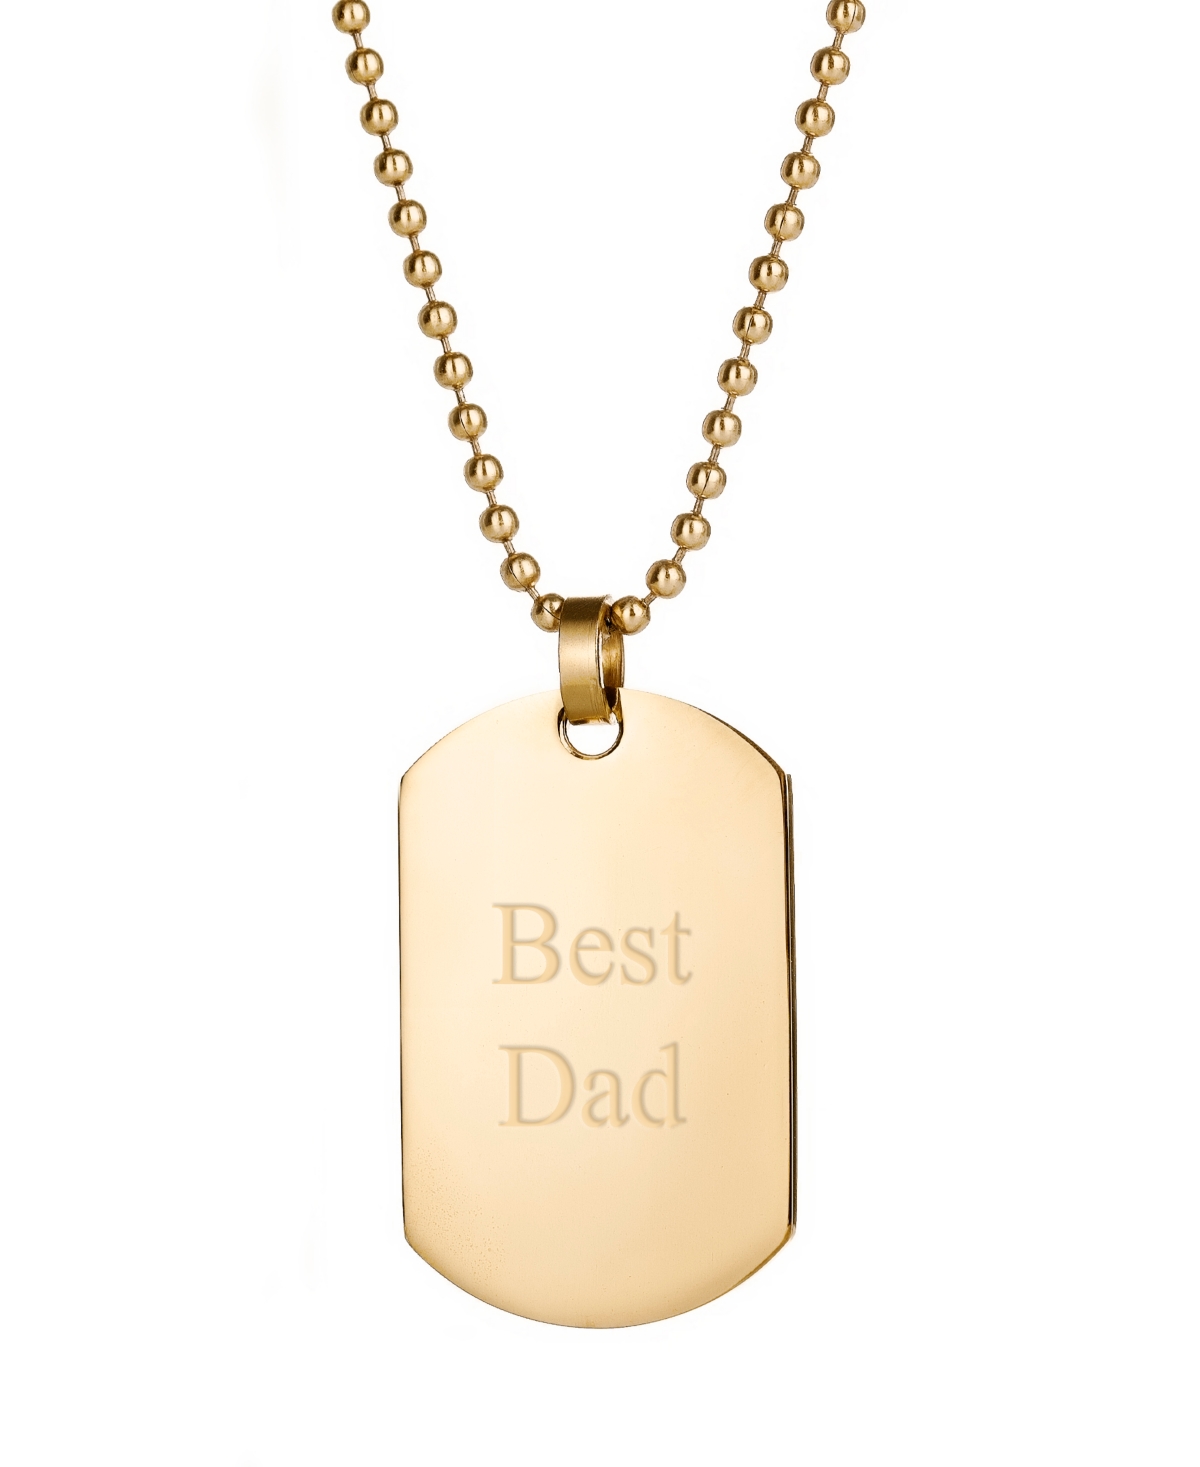 Eve's Jewelry Men's Gold Plated Medium "Best Dad" Stainless Steel Dog Tag Necklace